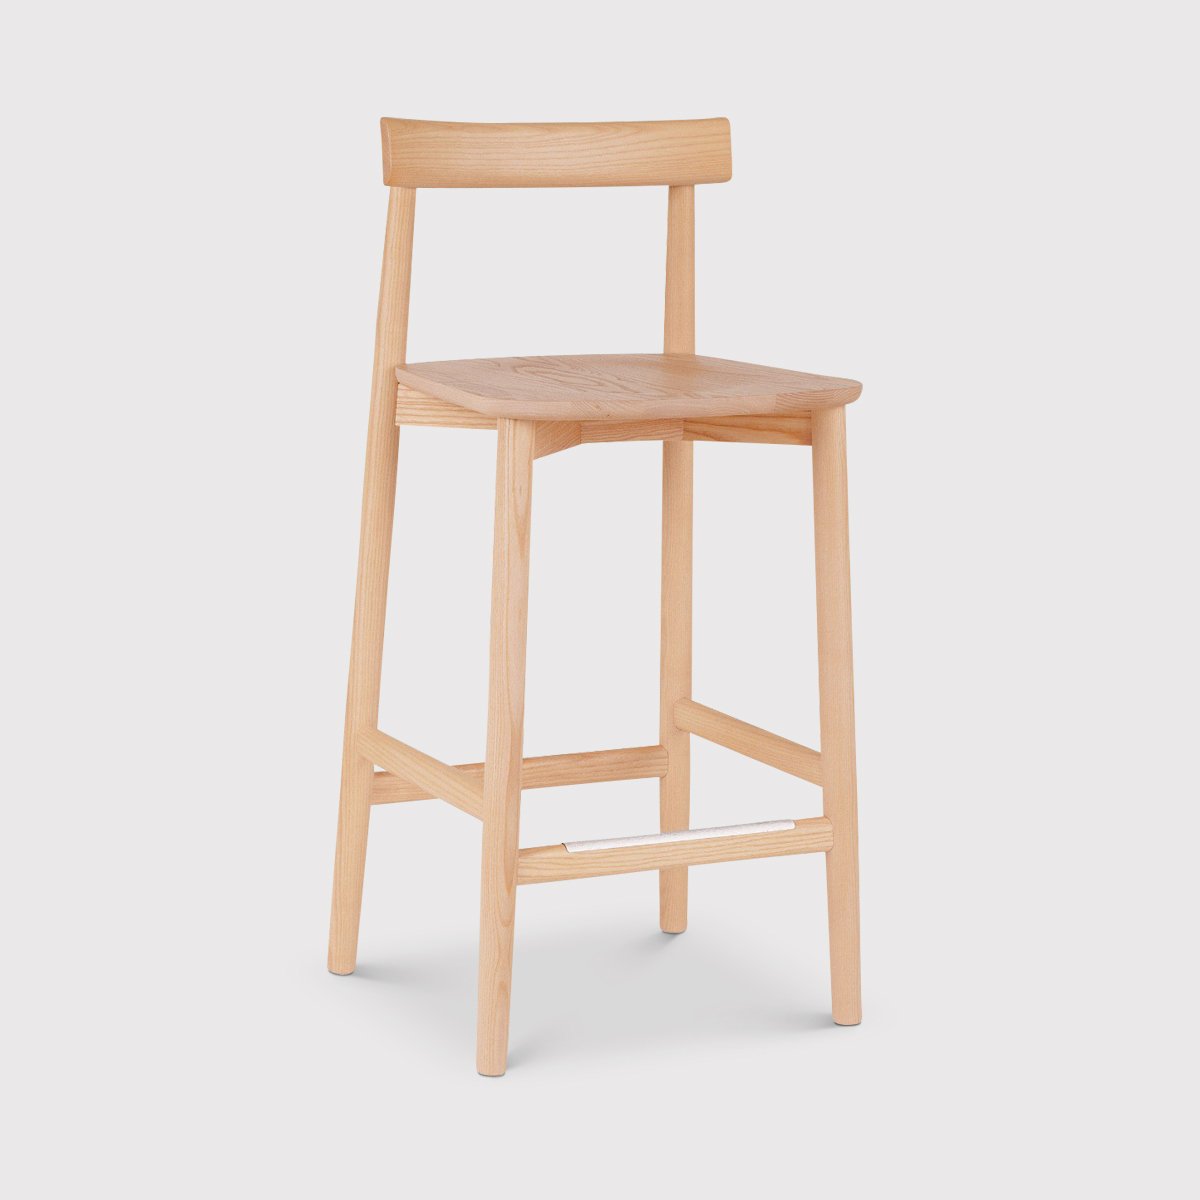 L.Ercolani Lara Counter Stool With Back 65cm, Brown | Barker & Stonehouse